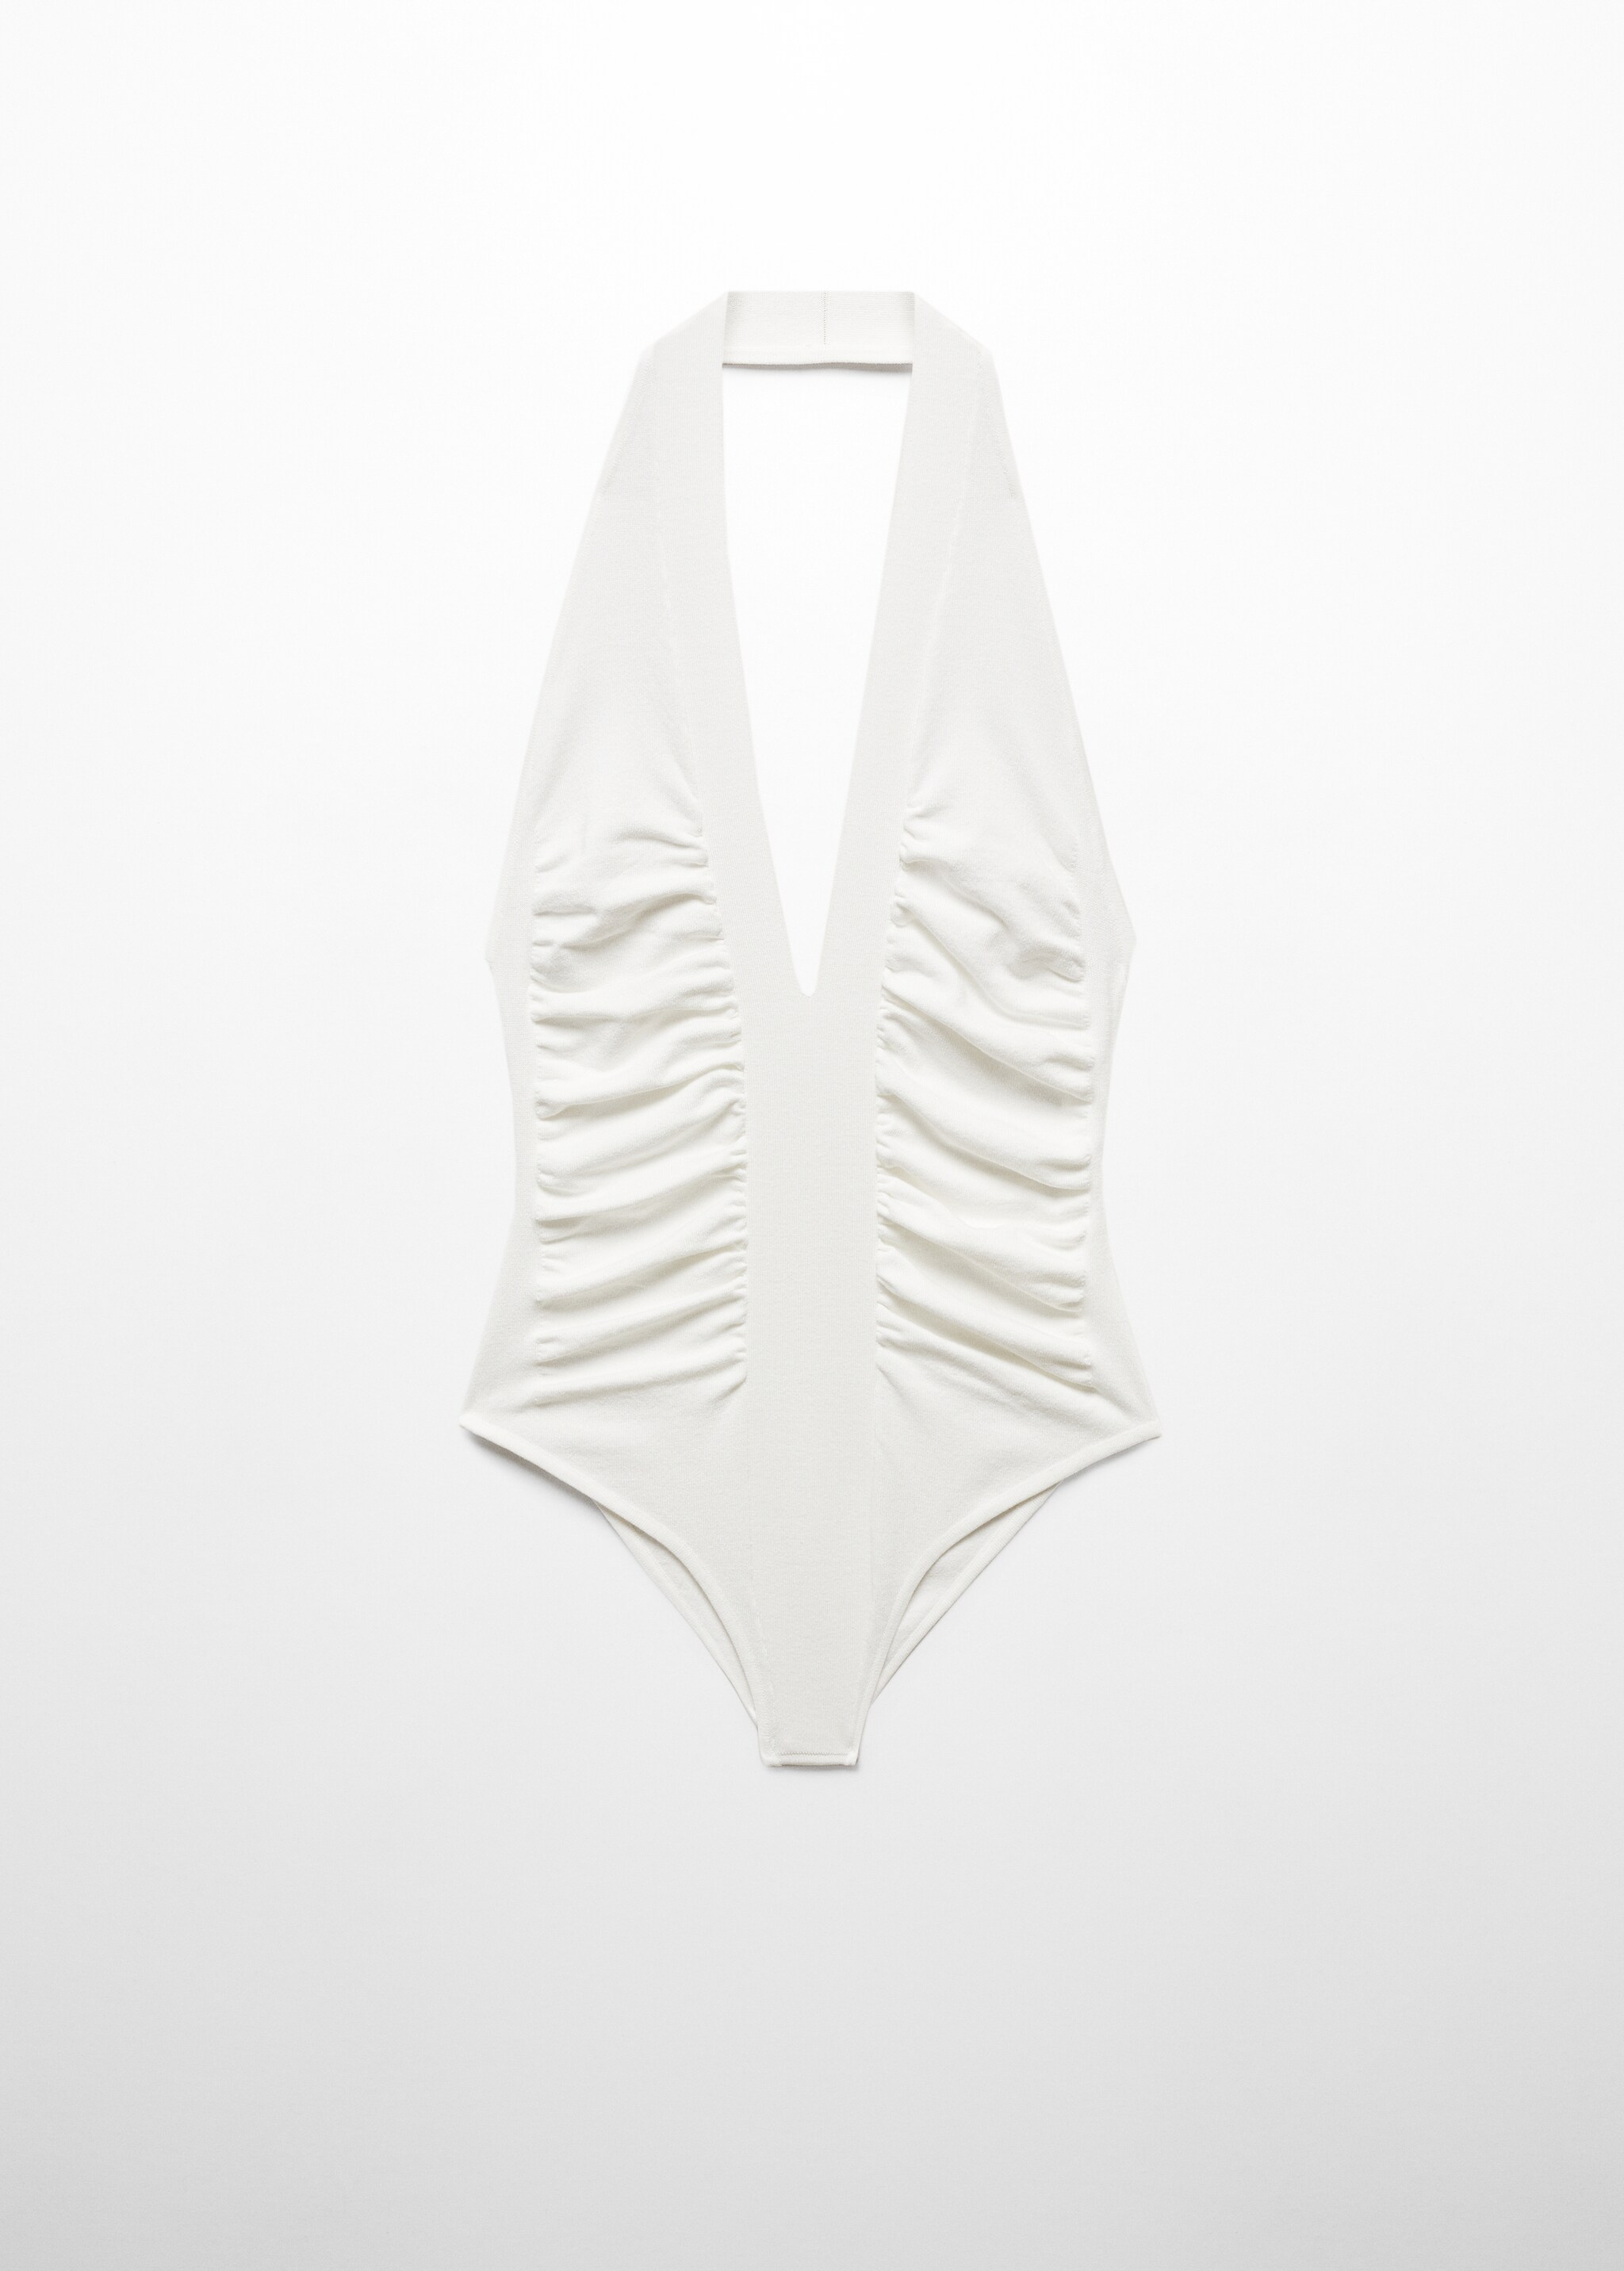 Draped halter bodysuit - Article without model